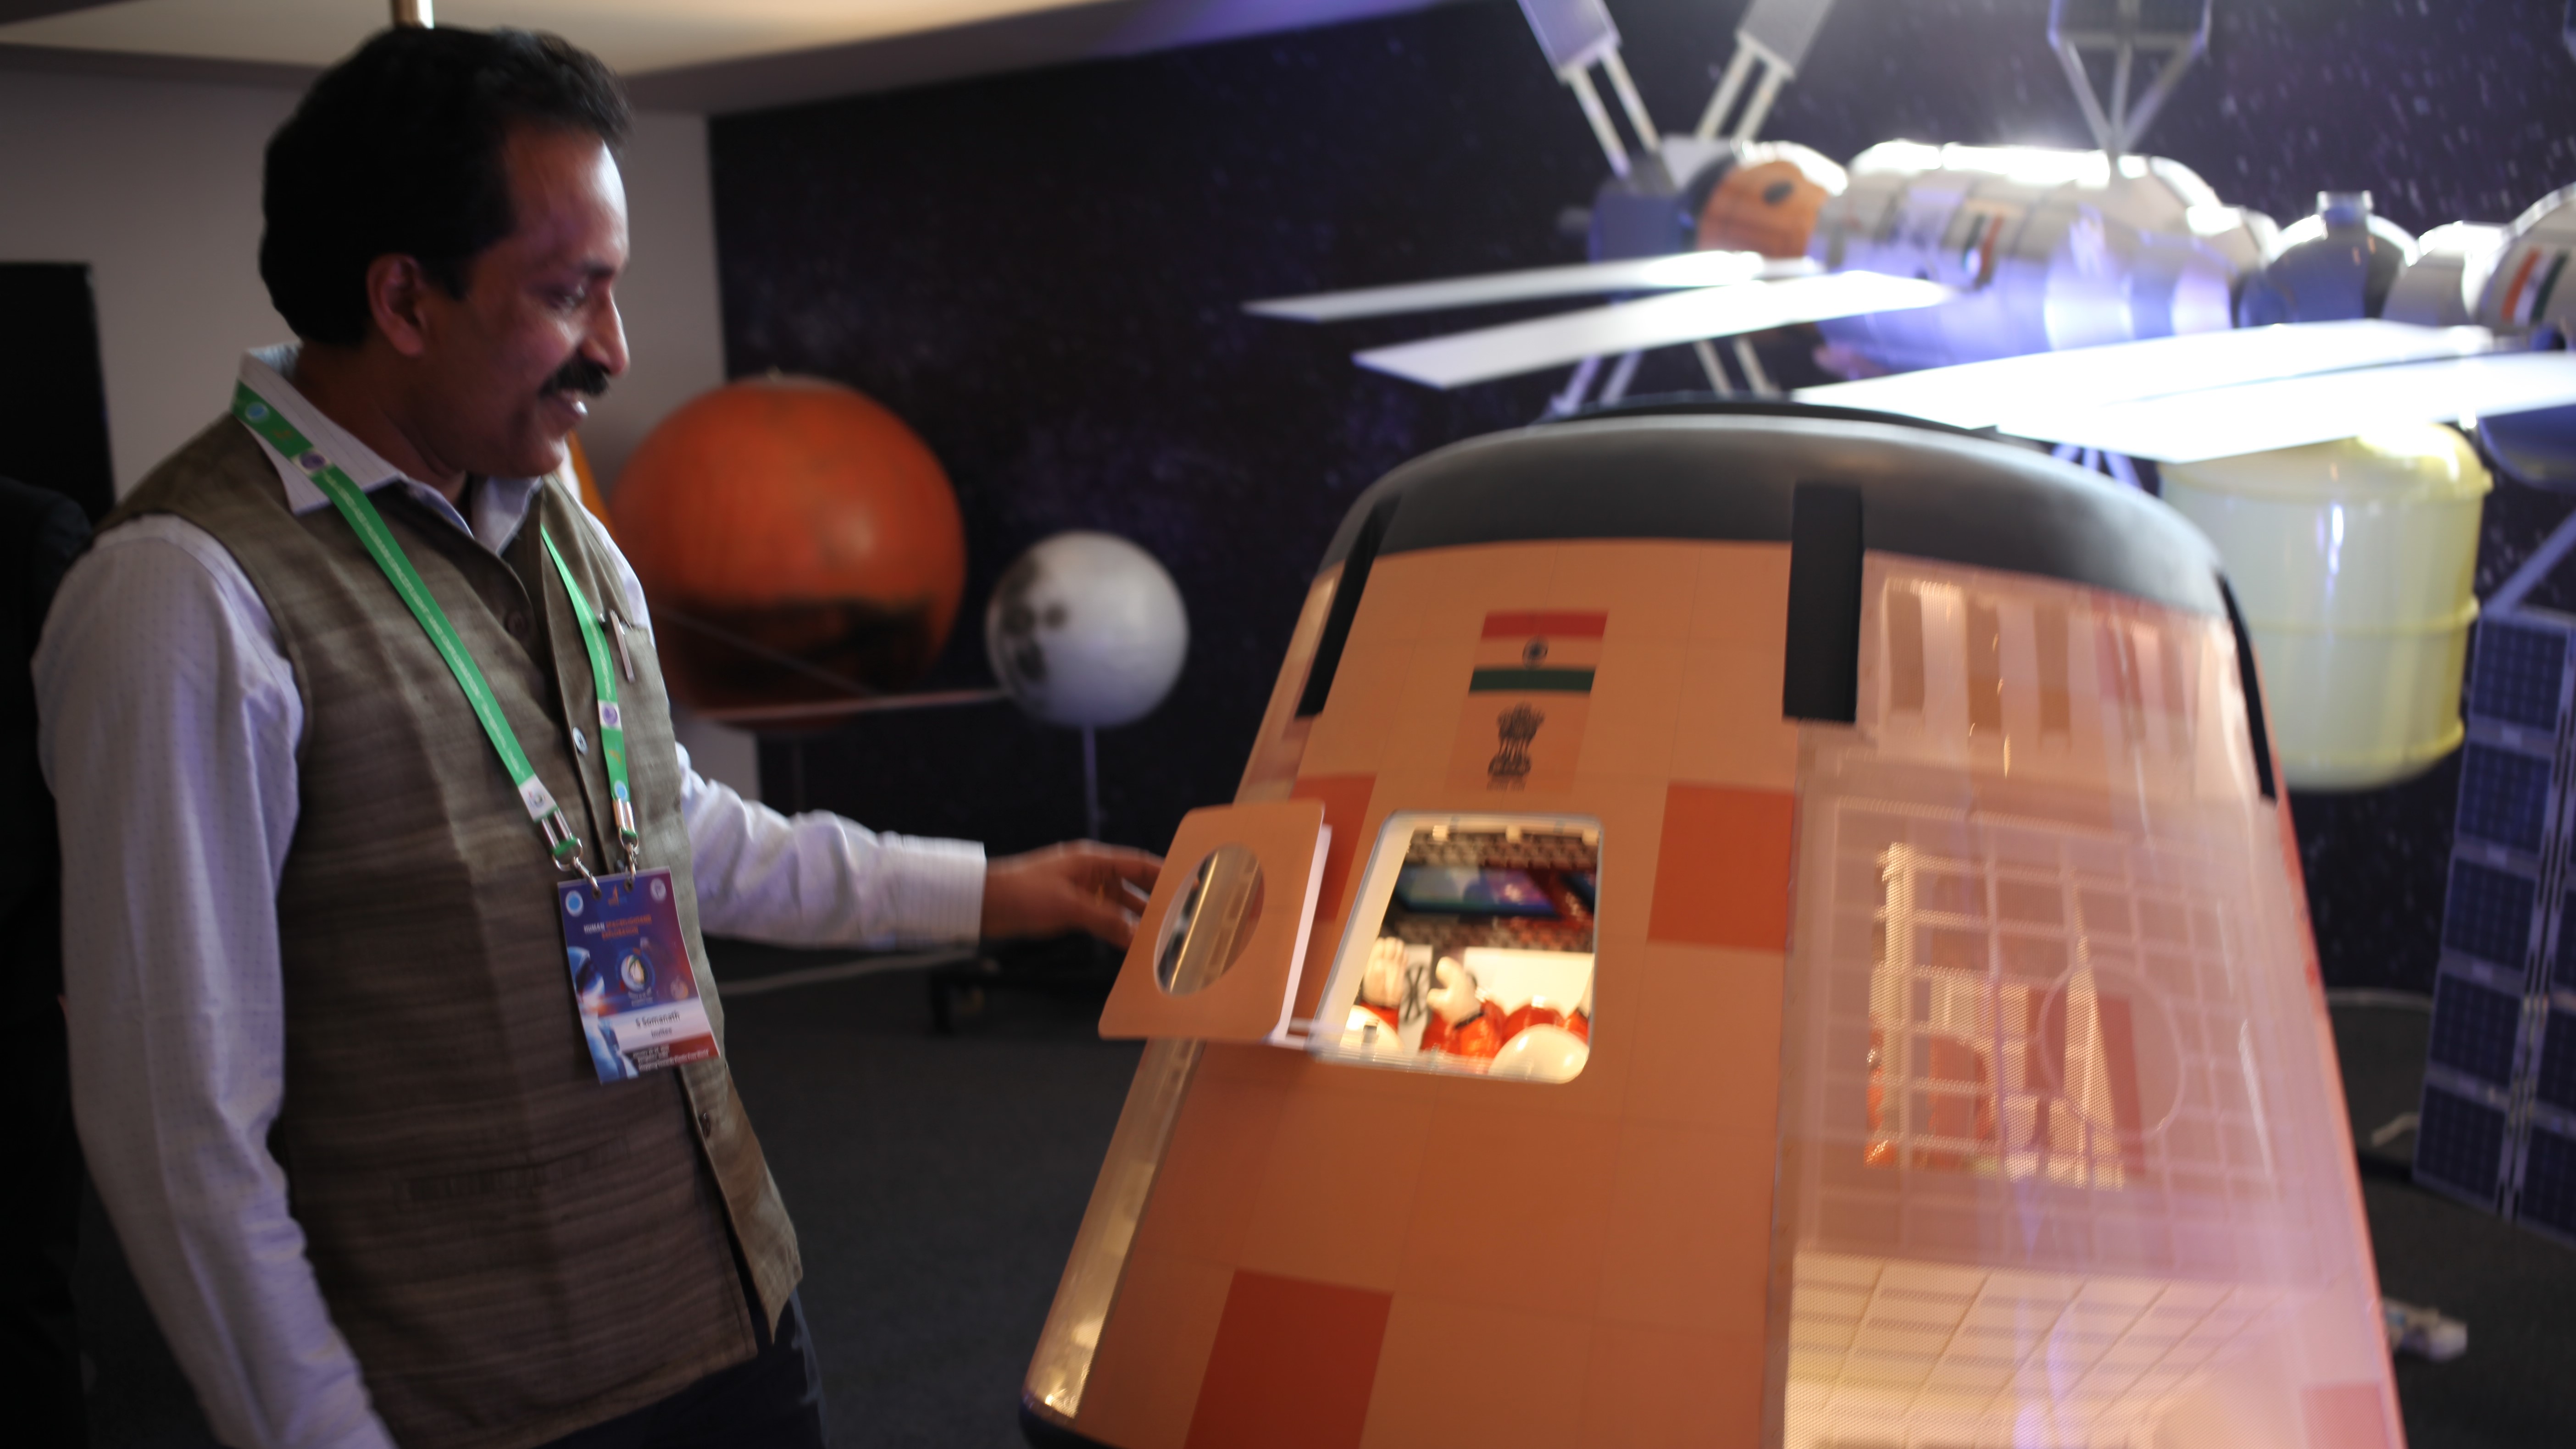 S. Somanath, then director of the Vikram Sarabhai Space Center, stands next to a scale model of India's Gaganyaan crew module in 2020.